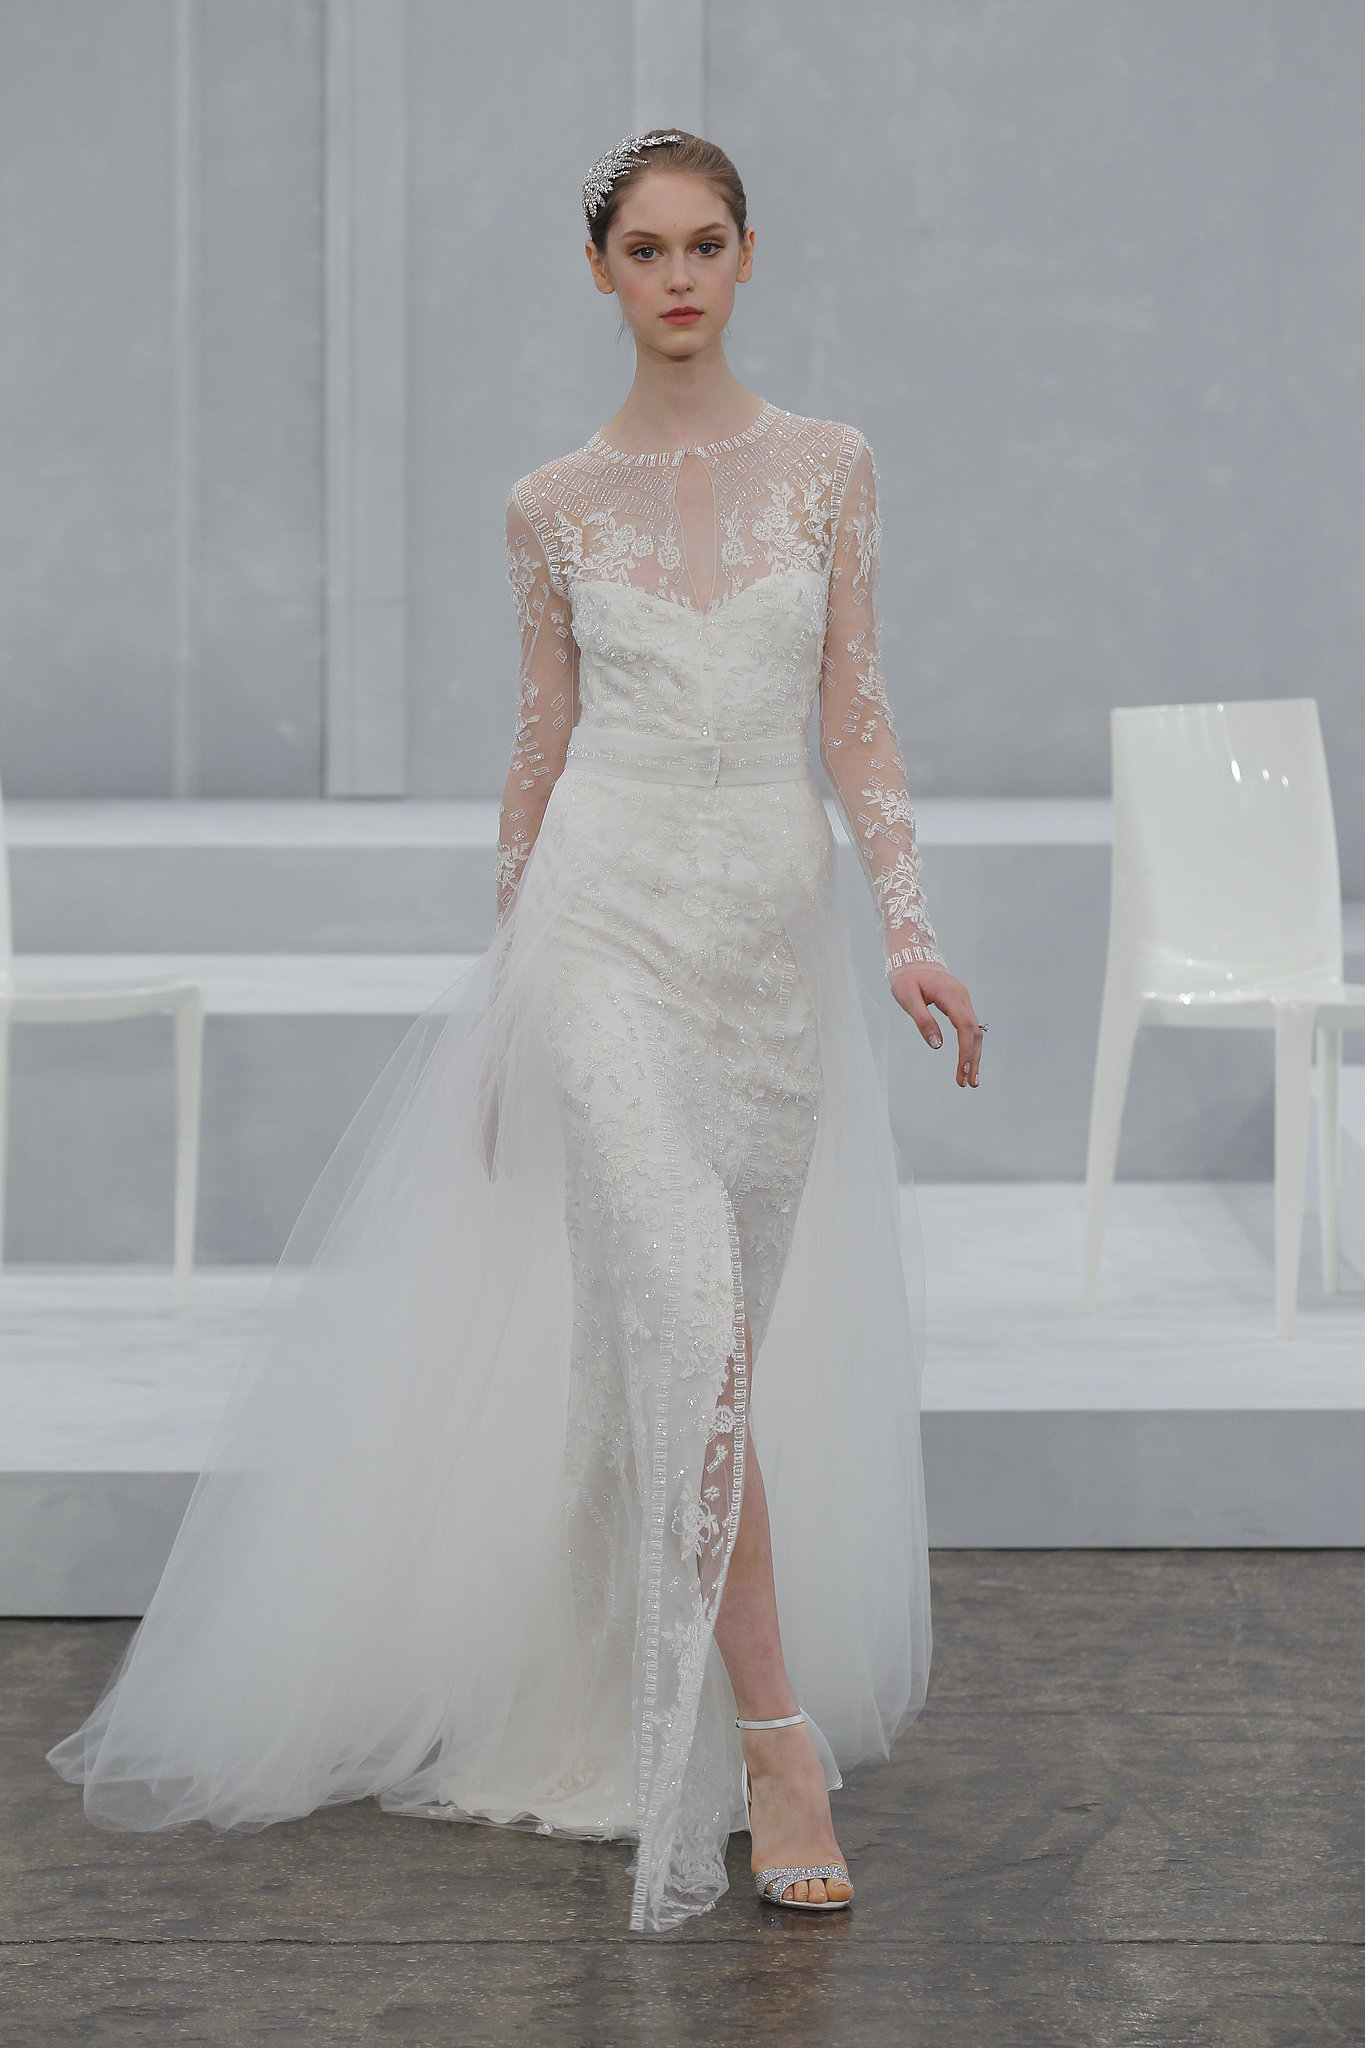 Screen Siren Slit Wedding Dress from Monique Lhuillier's Spring 2015 Bridal Collection